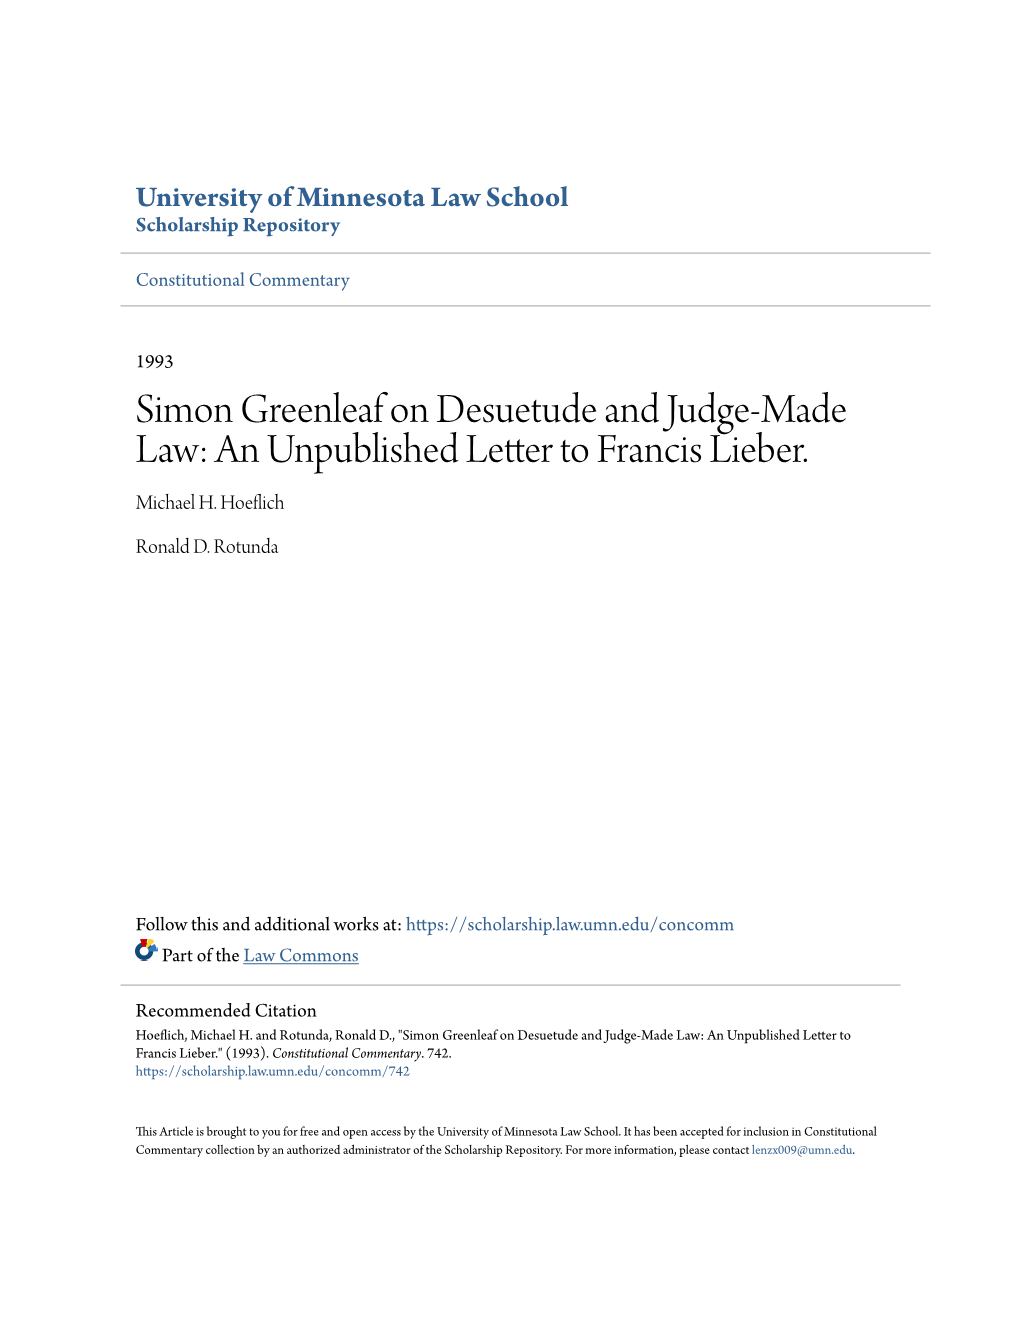 Simon Greenleaf on Desuetude and Judge-Made Law: an Unpublished Letter to Francis Lieber